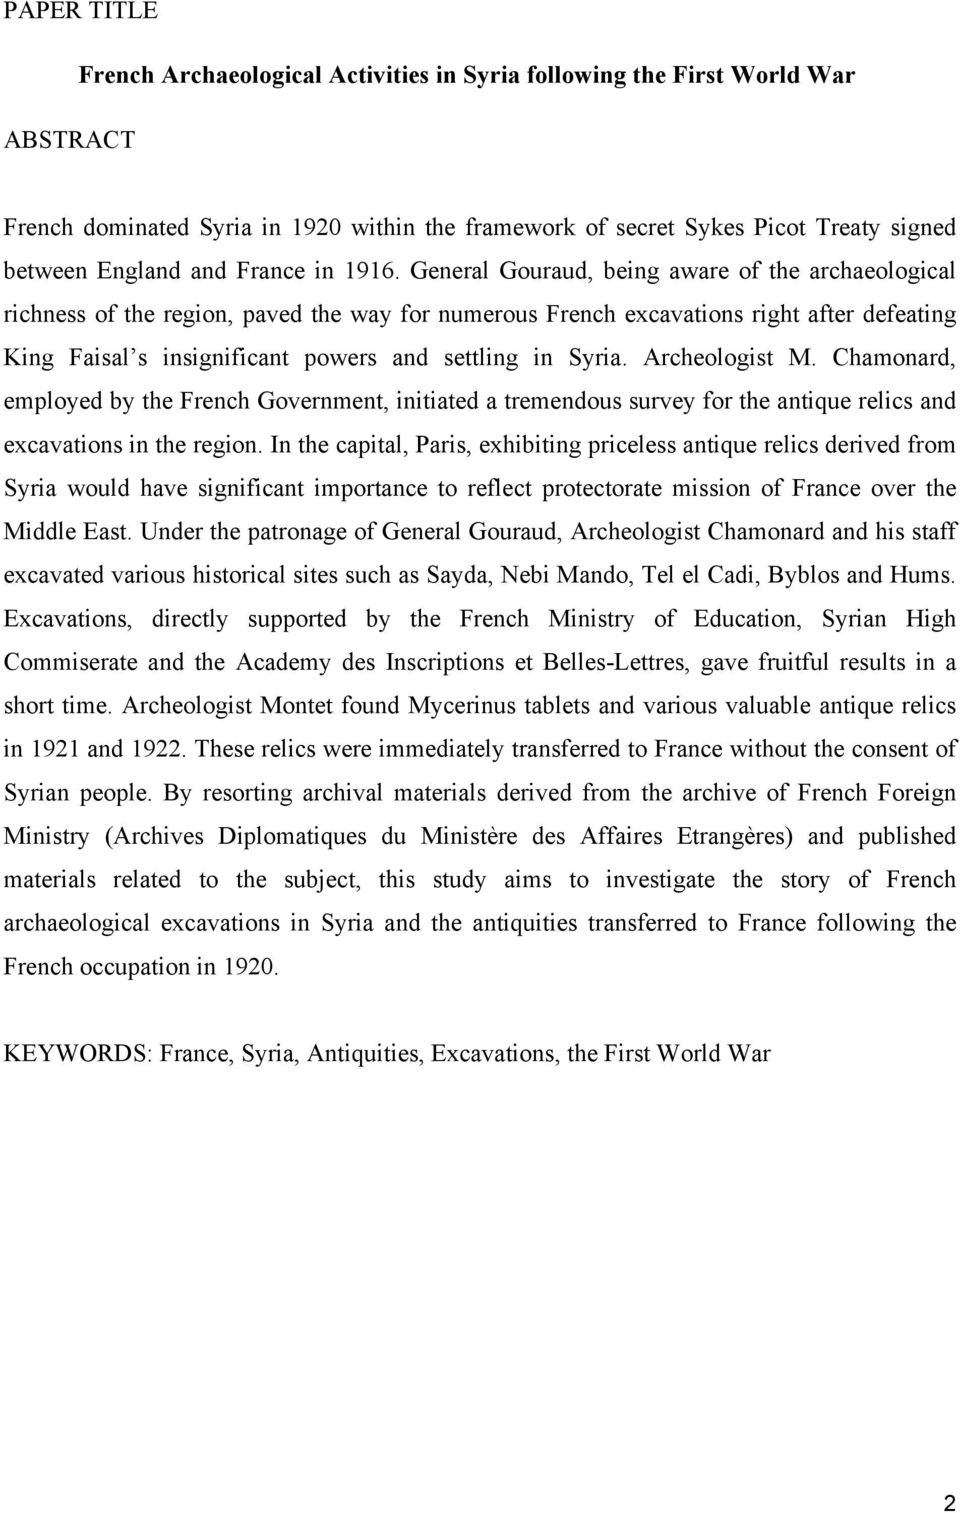 General Gouraud, being aware of the archaeological richness of the region, paved the way for numerous French excavations right after defeating King Faisal s insignificant powers and settling in Syria.